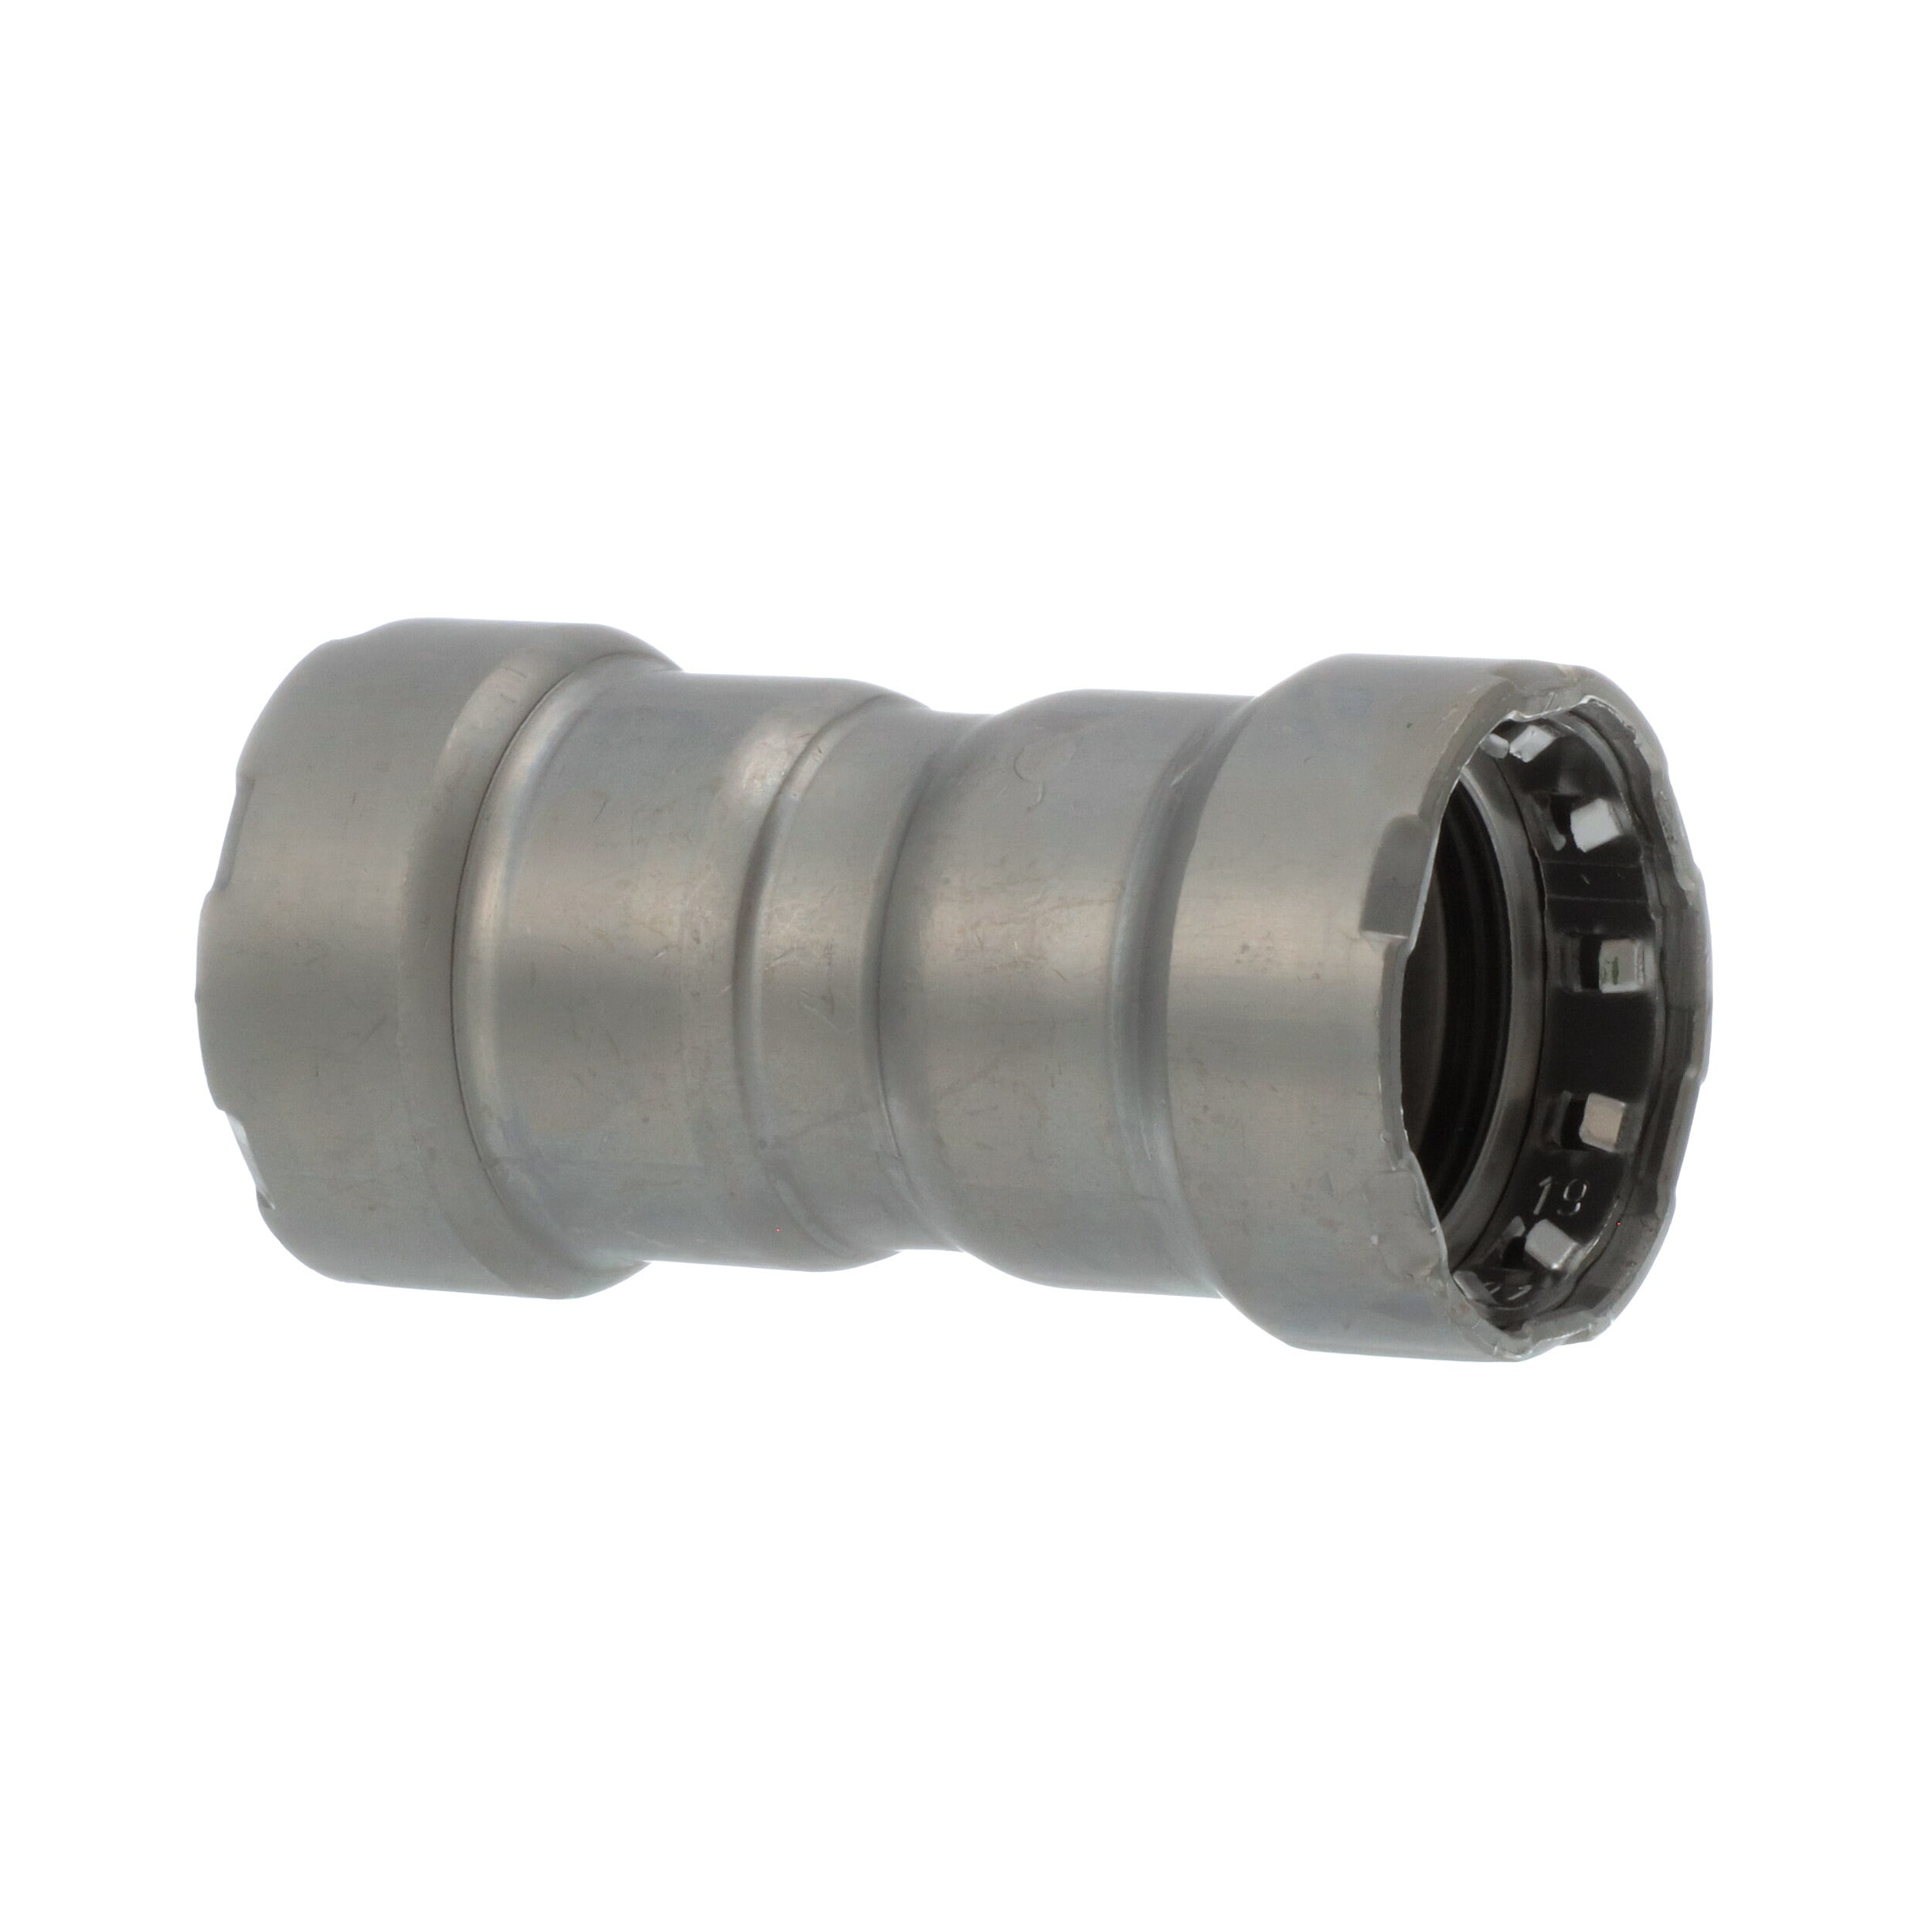 MegaPress® 22005 Pipe Coupling With Stop, 3/4 in Nominal, Press End Style, Carbon Steel